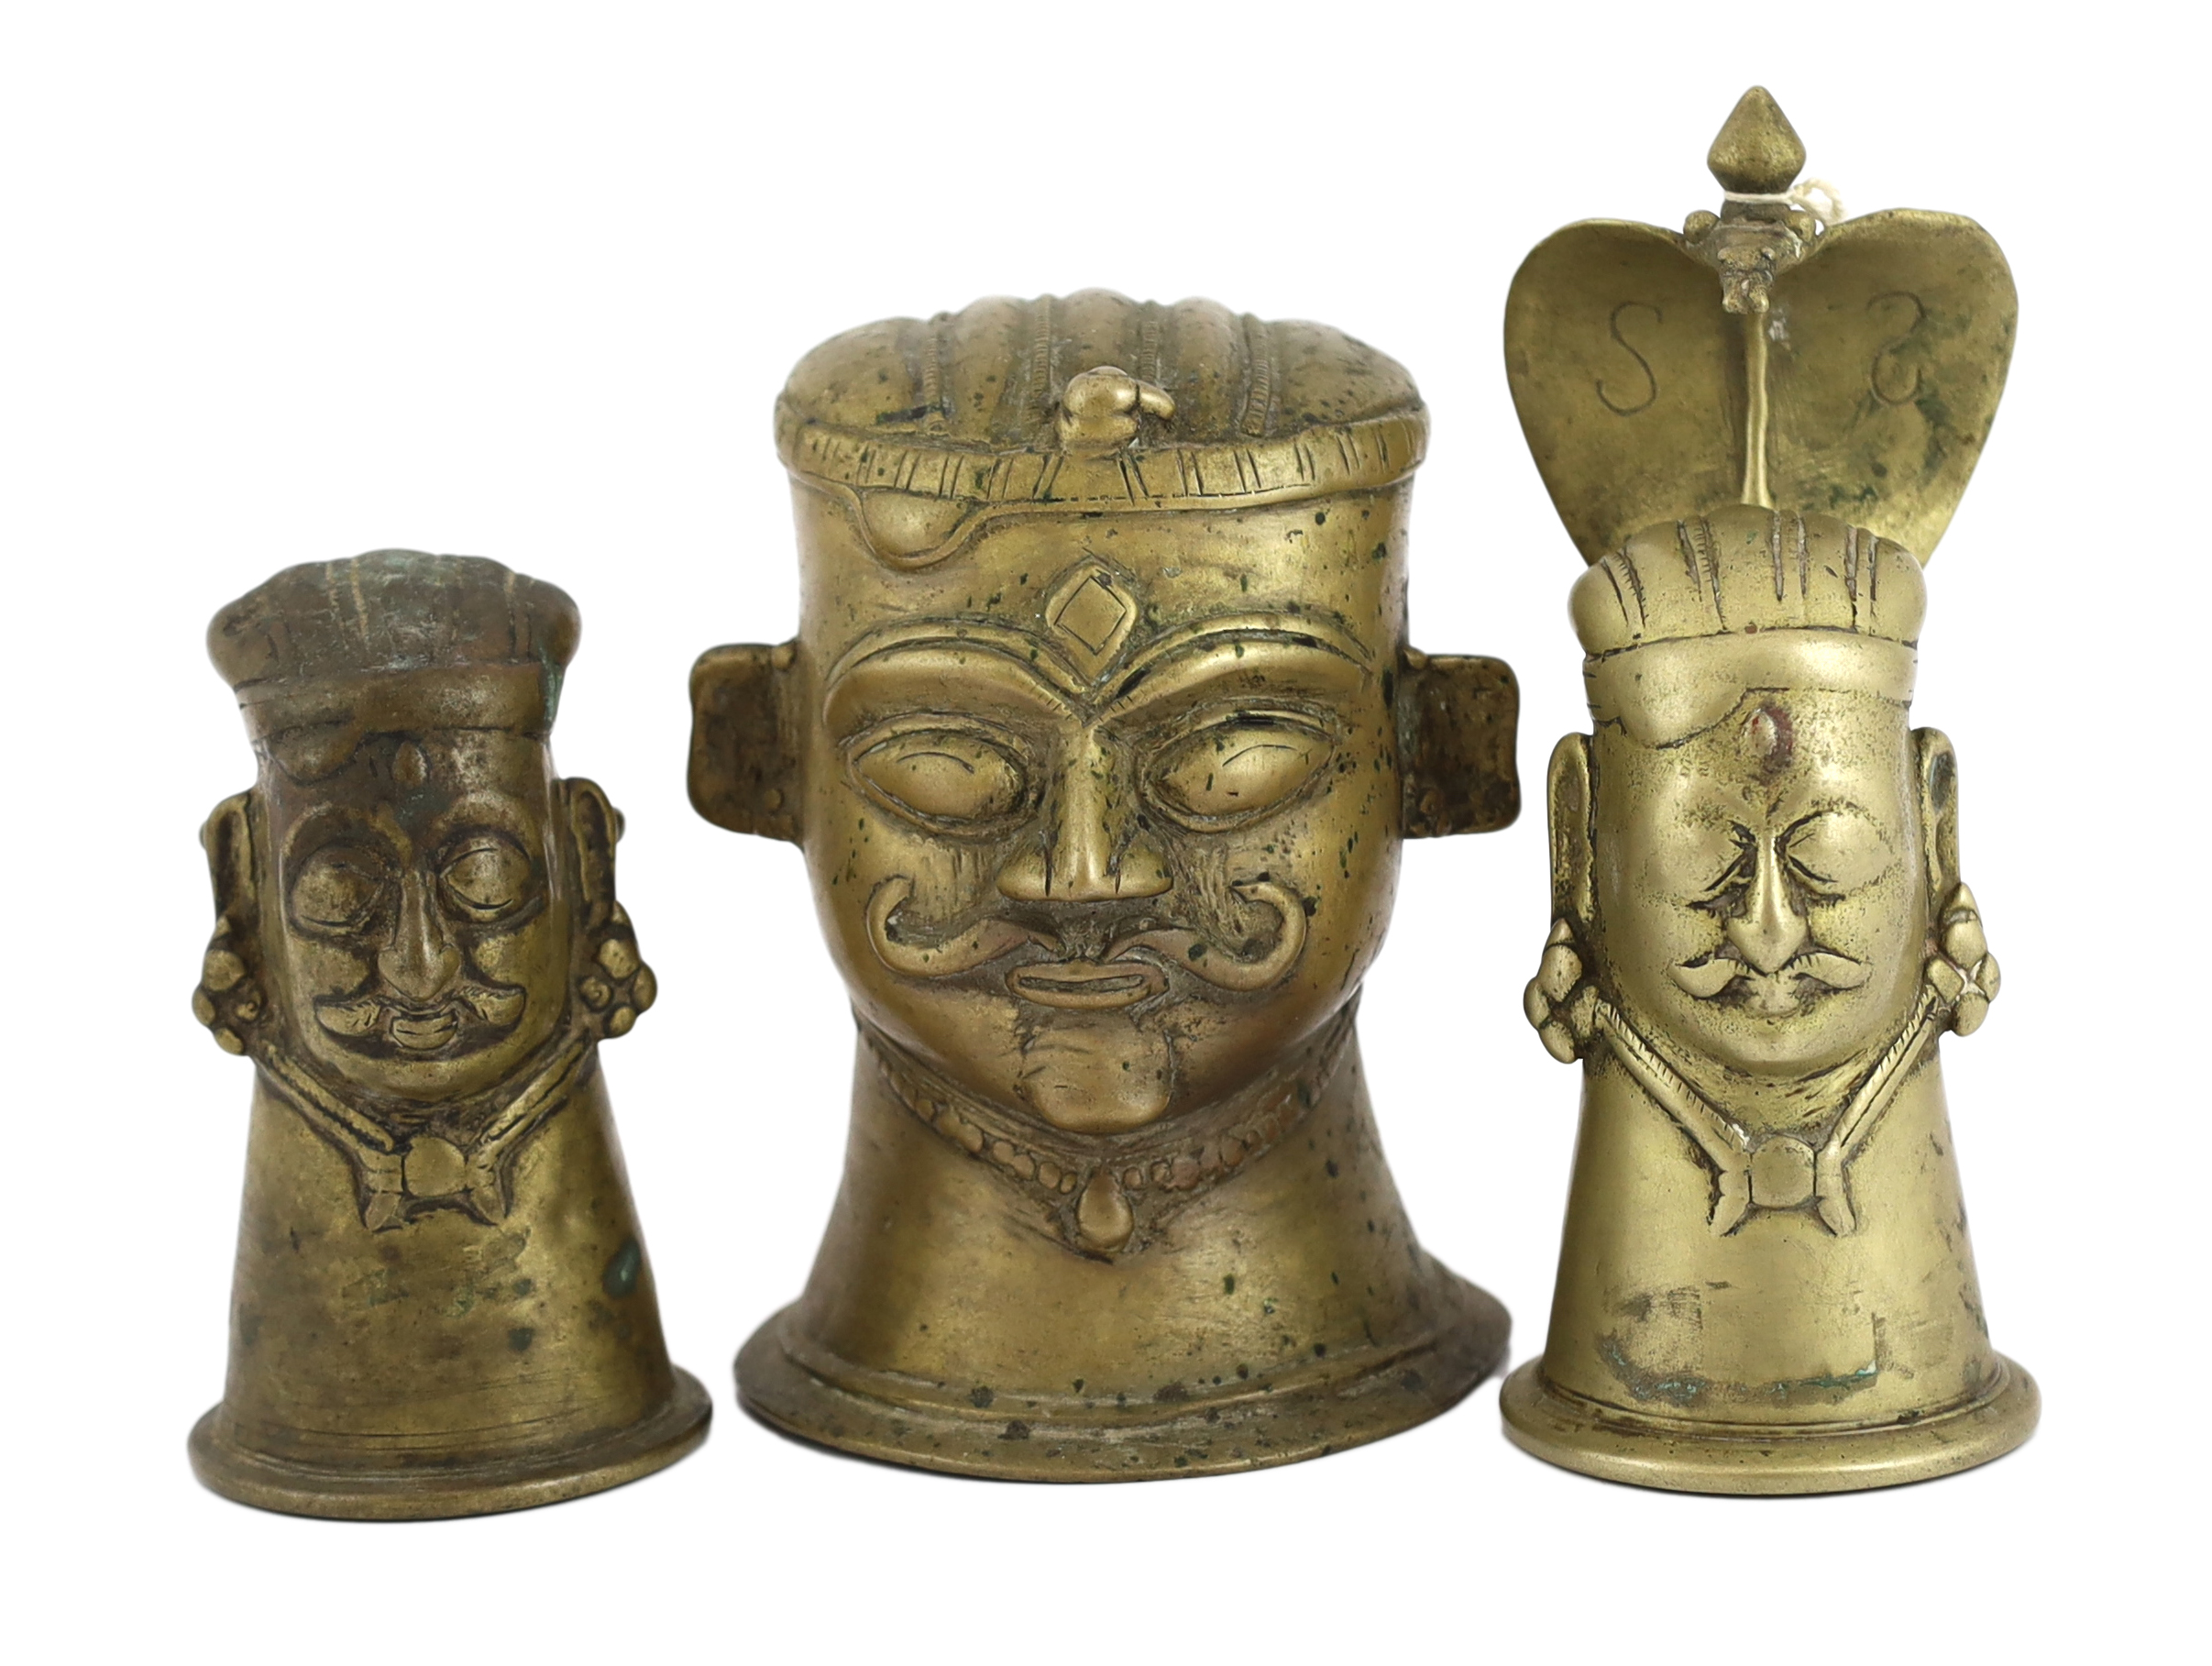 A group of three brass alloy Shiva Mukhalingam, Southern India, 16th-18th century, each depicting a Shiva head, wearing his characteristic moustache, earrings and matted hair, one example surmounted by a removable Naga (